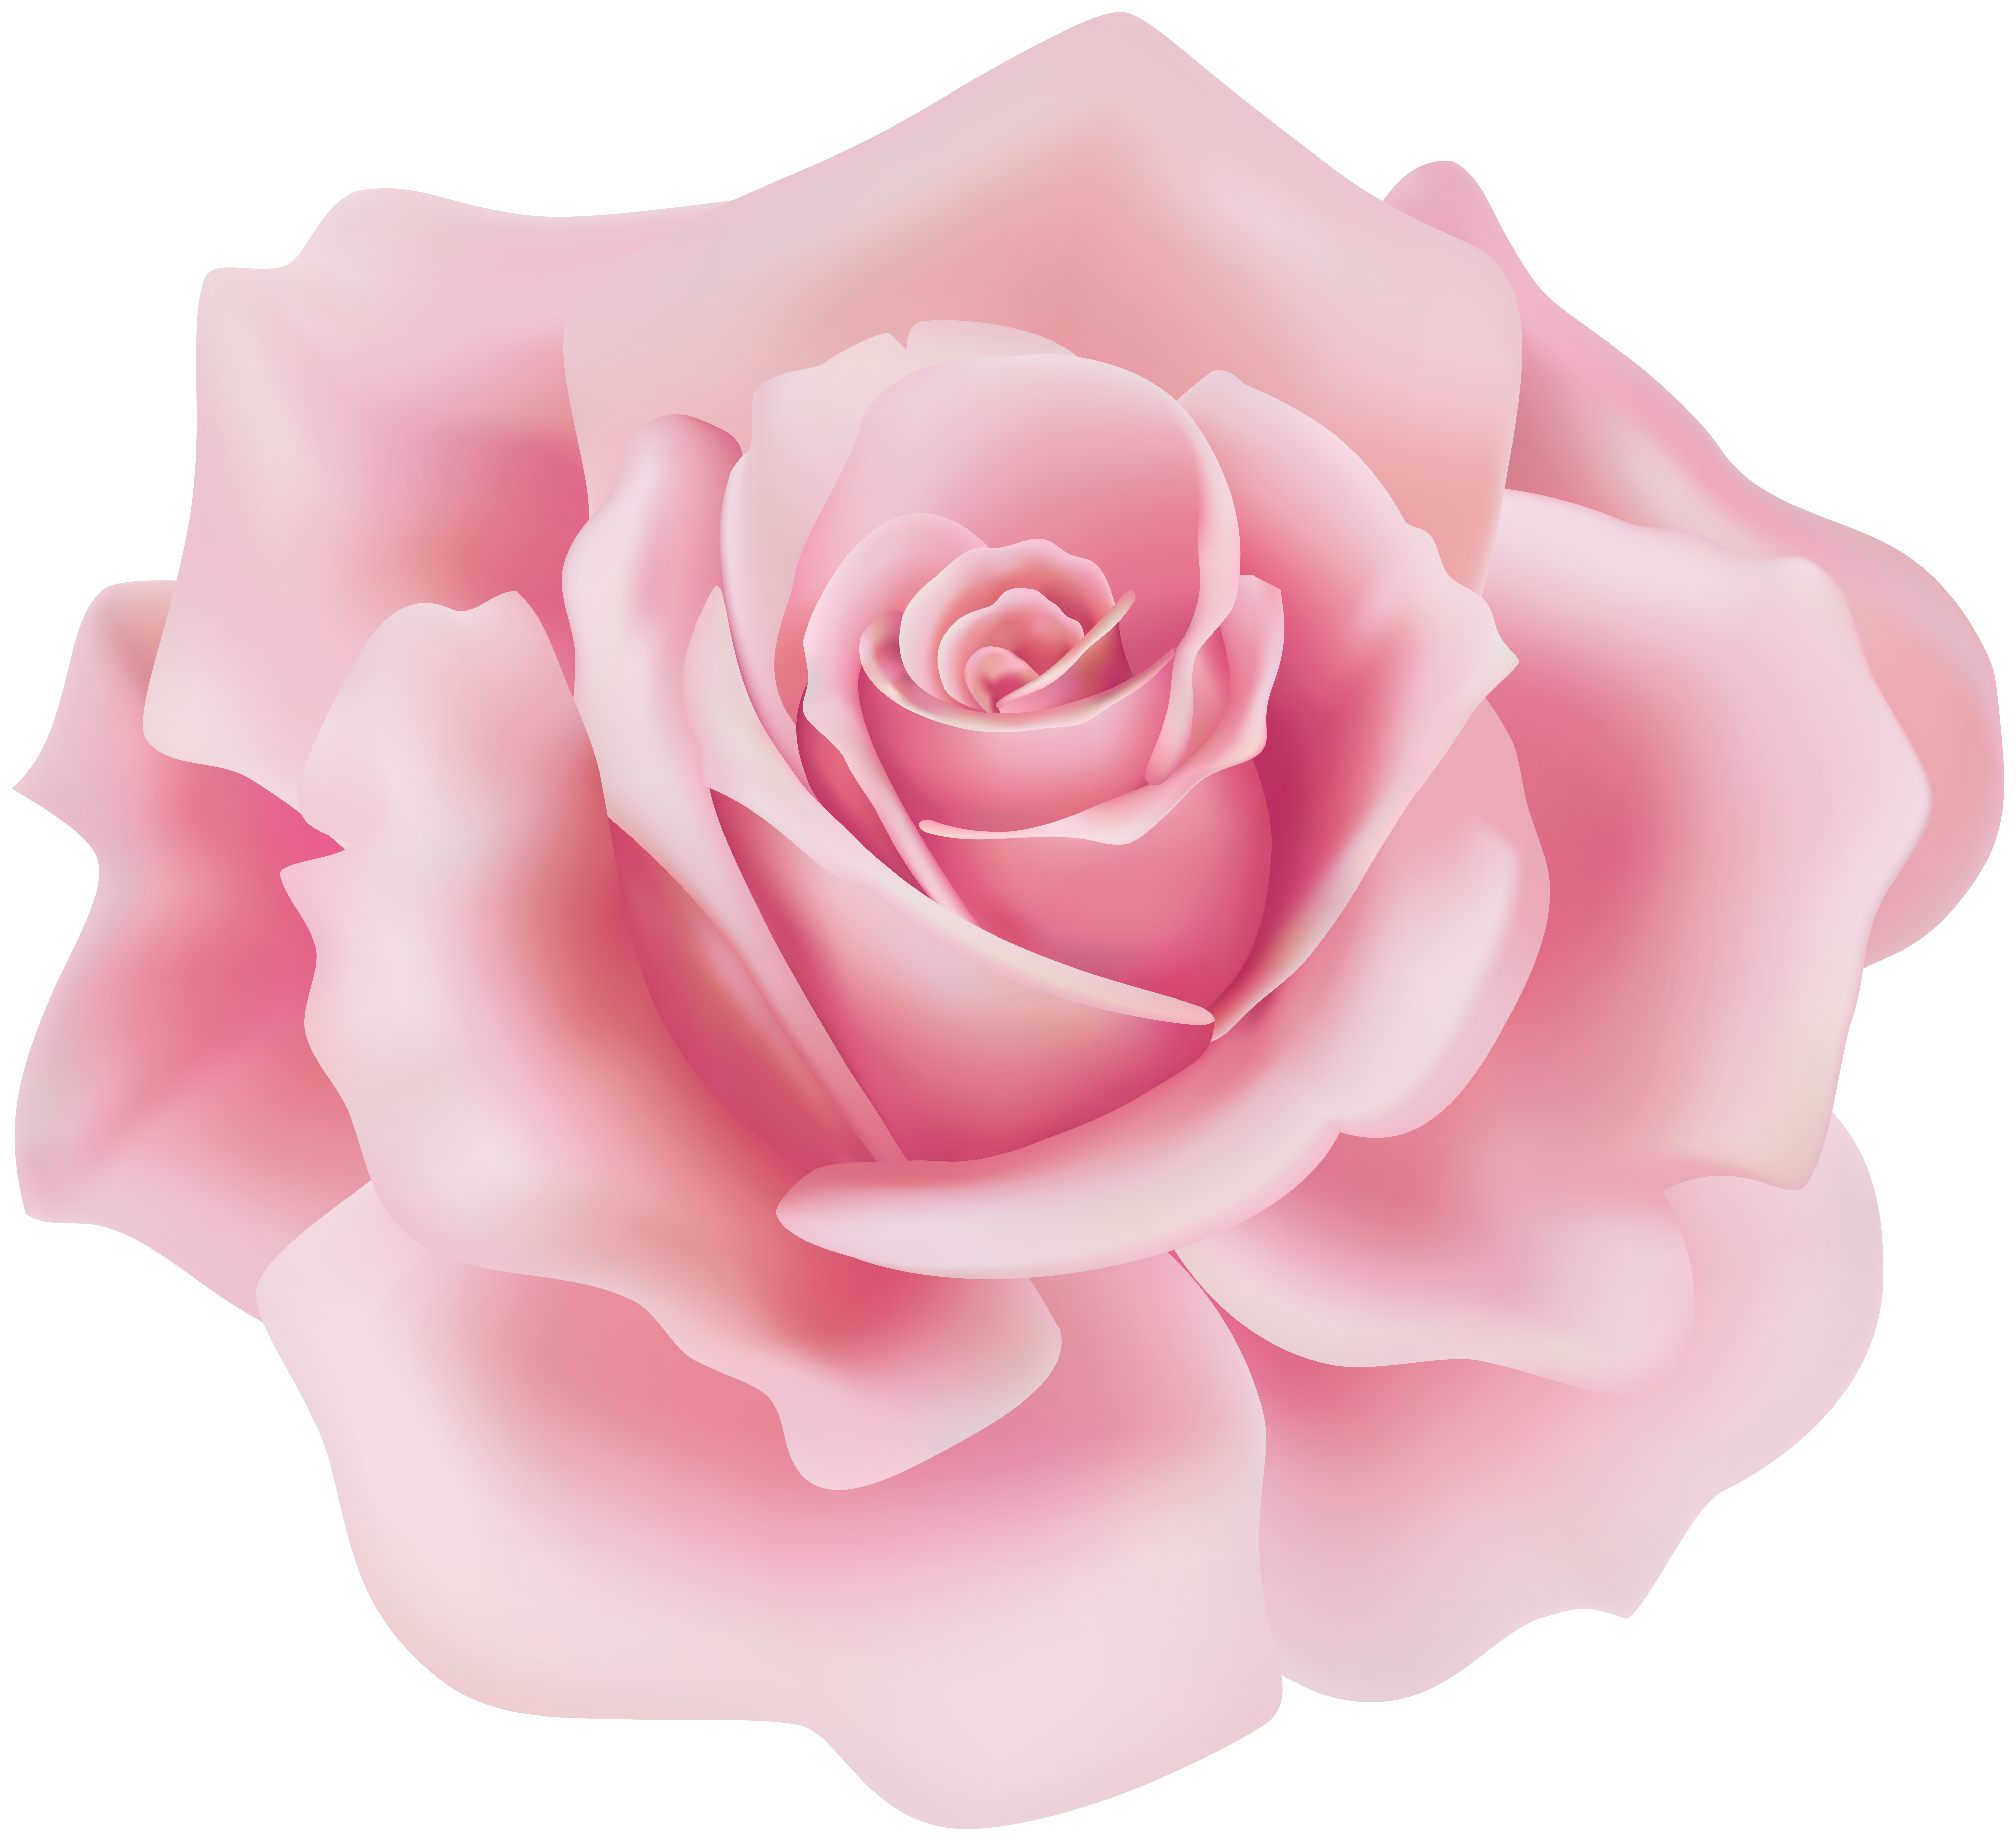 https://gallery.yopriceville.com/var/albums/Free-Clipart-Pictures/Roses-PNG/Delicate_Soft_Pink_Rose_PNG_Clipart.png?m=1589002041